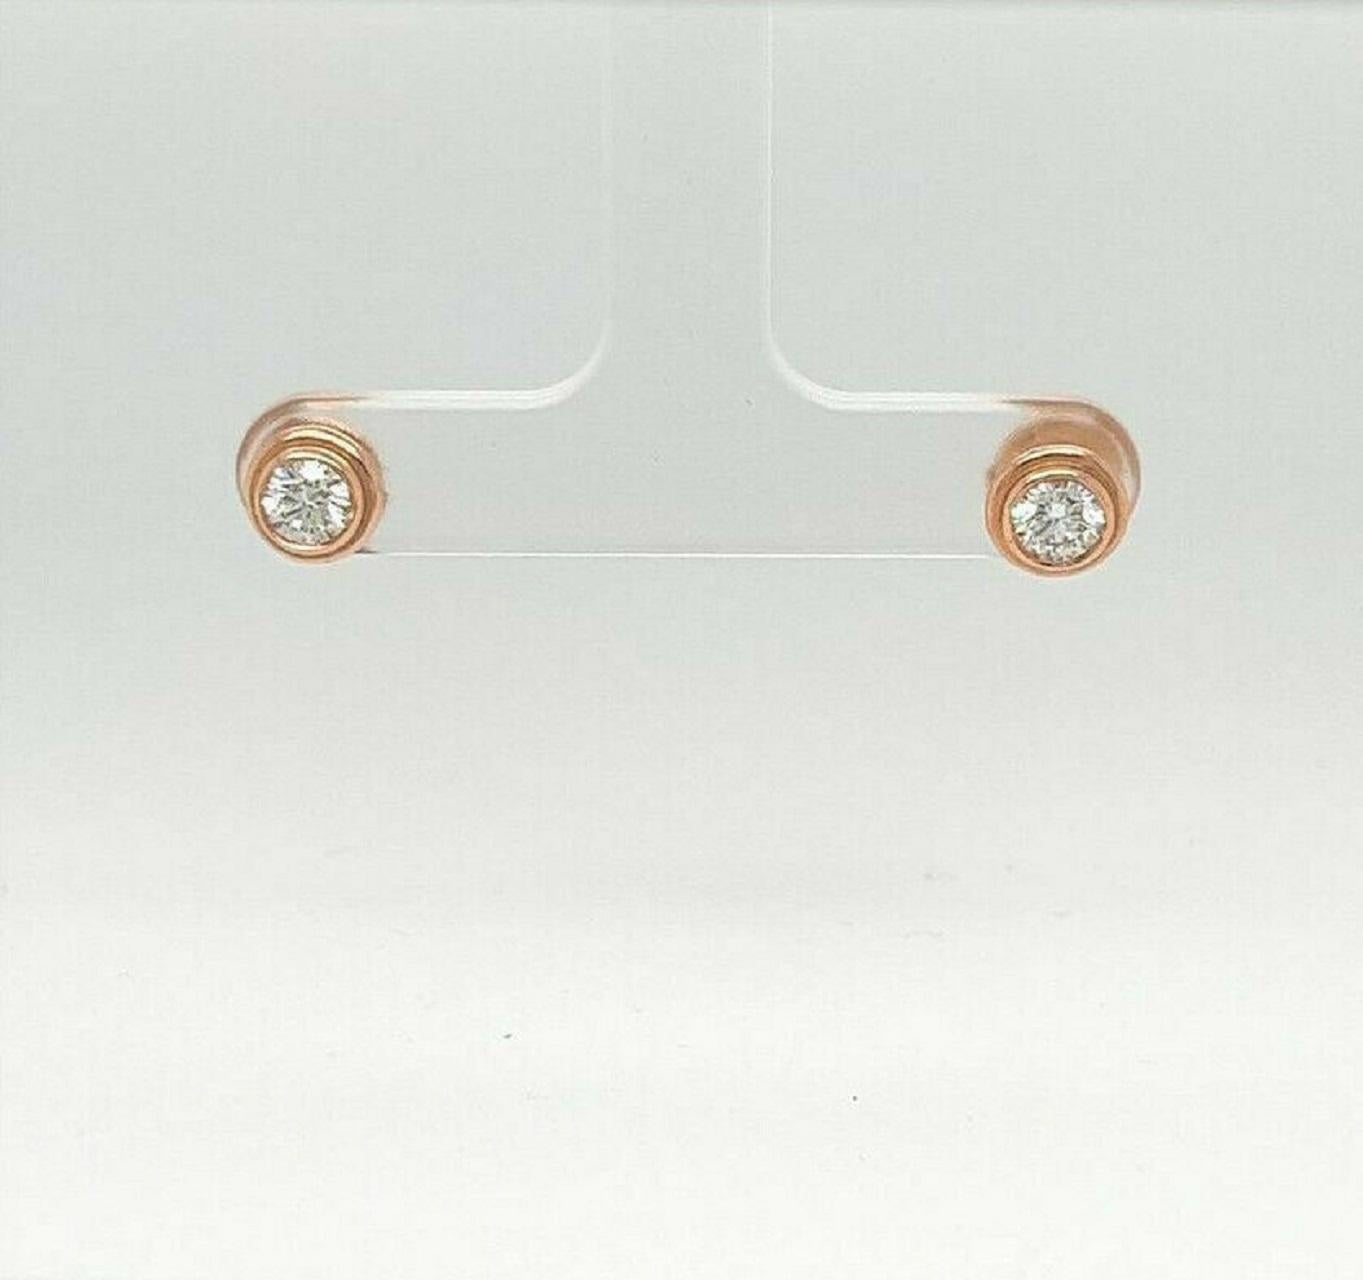 DIAMOND STUD EARRINGS 0.60 CARATS 18K ROSE GOLD

Round Diamond weighs 0.30 carat F/G Color, SI2 Clarity

Round Diamond weighs 0.30 carat F/G Color, SI2 Clarity

Total Carat Weight 0.60 carats

Set in 18K Rose Gold

Shipped in a gift box 

FREE UPS